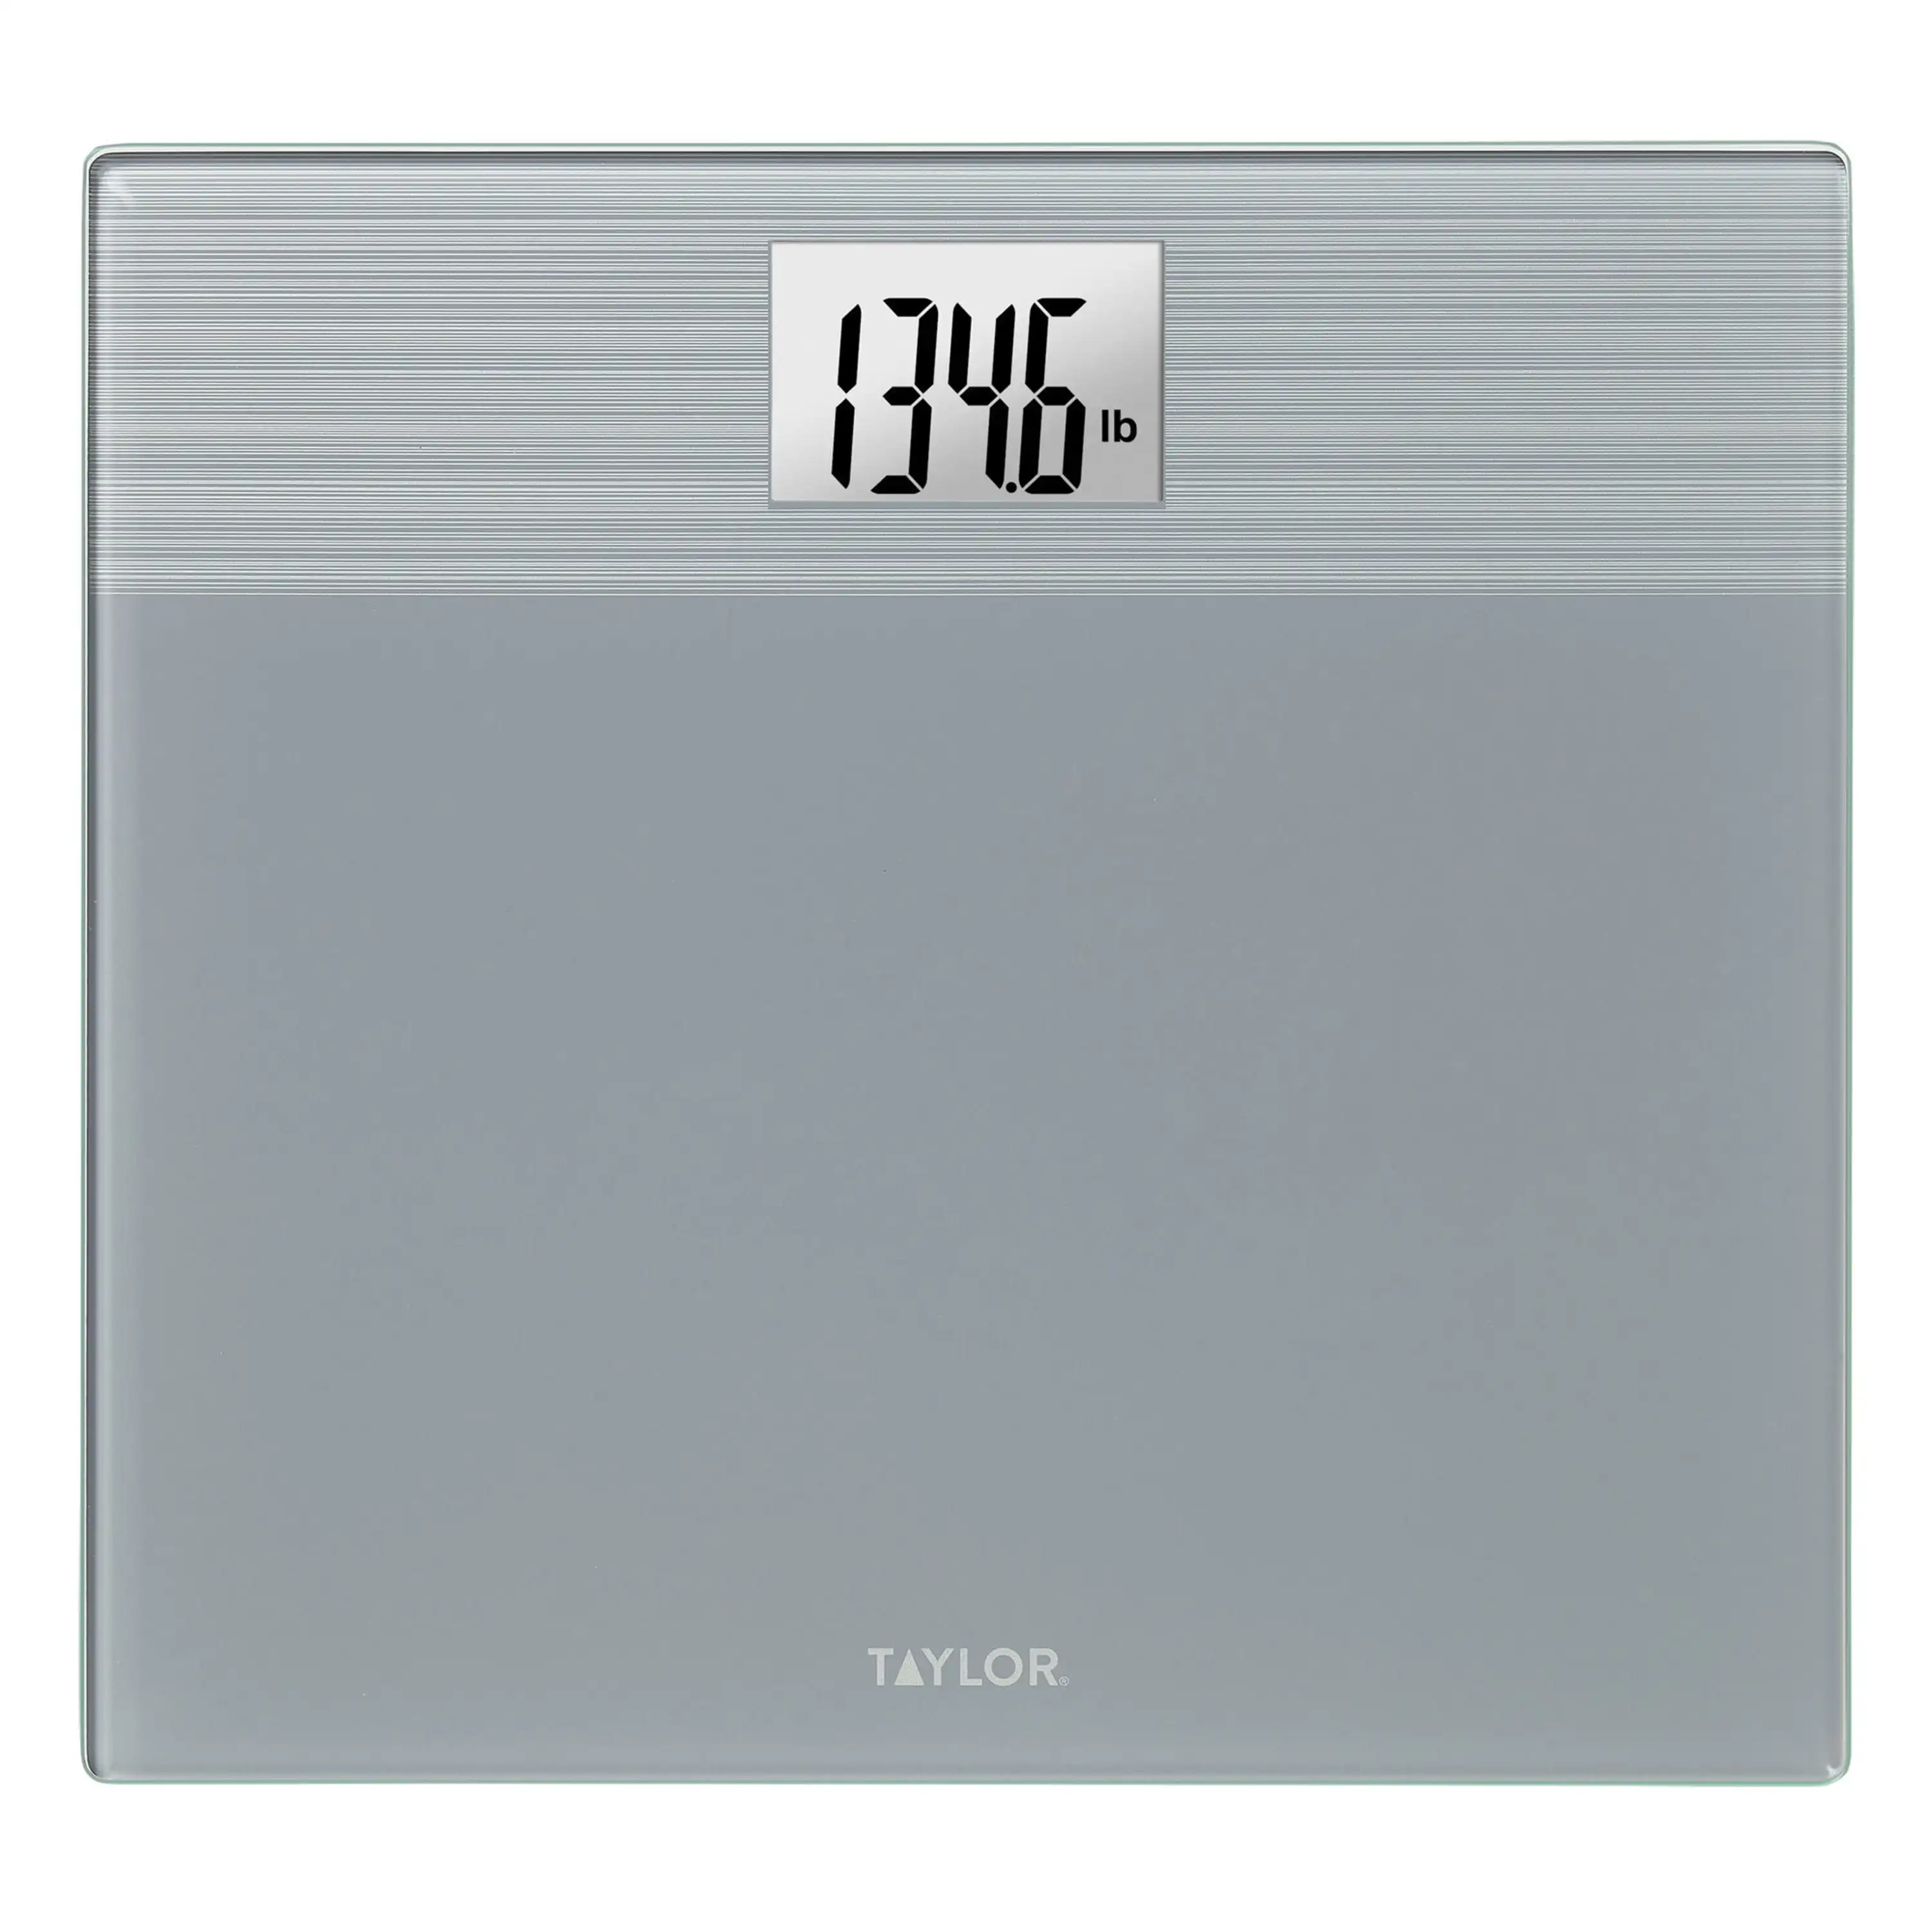 

Taylor 500 lb Digital Glass High Capacity Scale Extra Wide Platform Battery Operated Silver